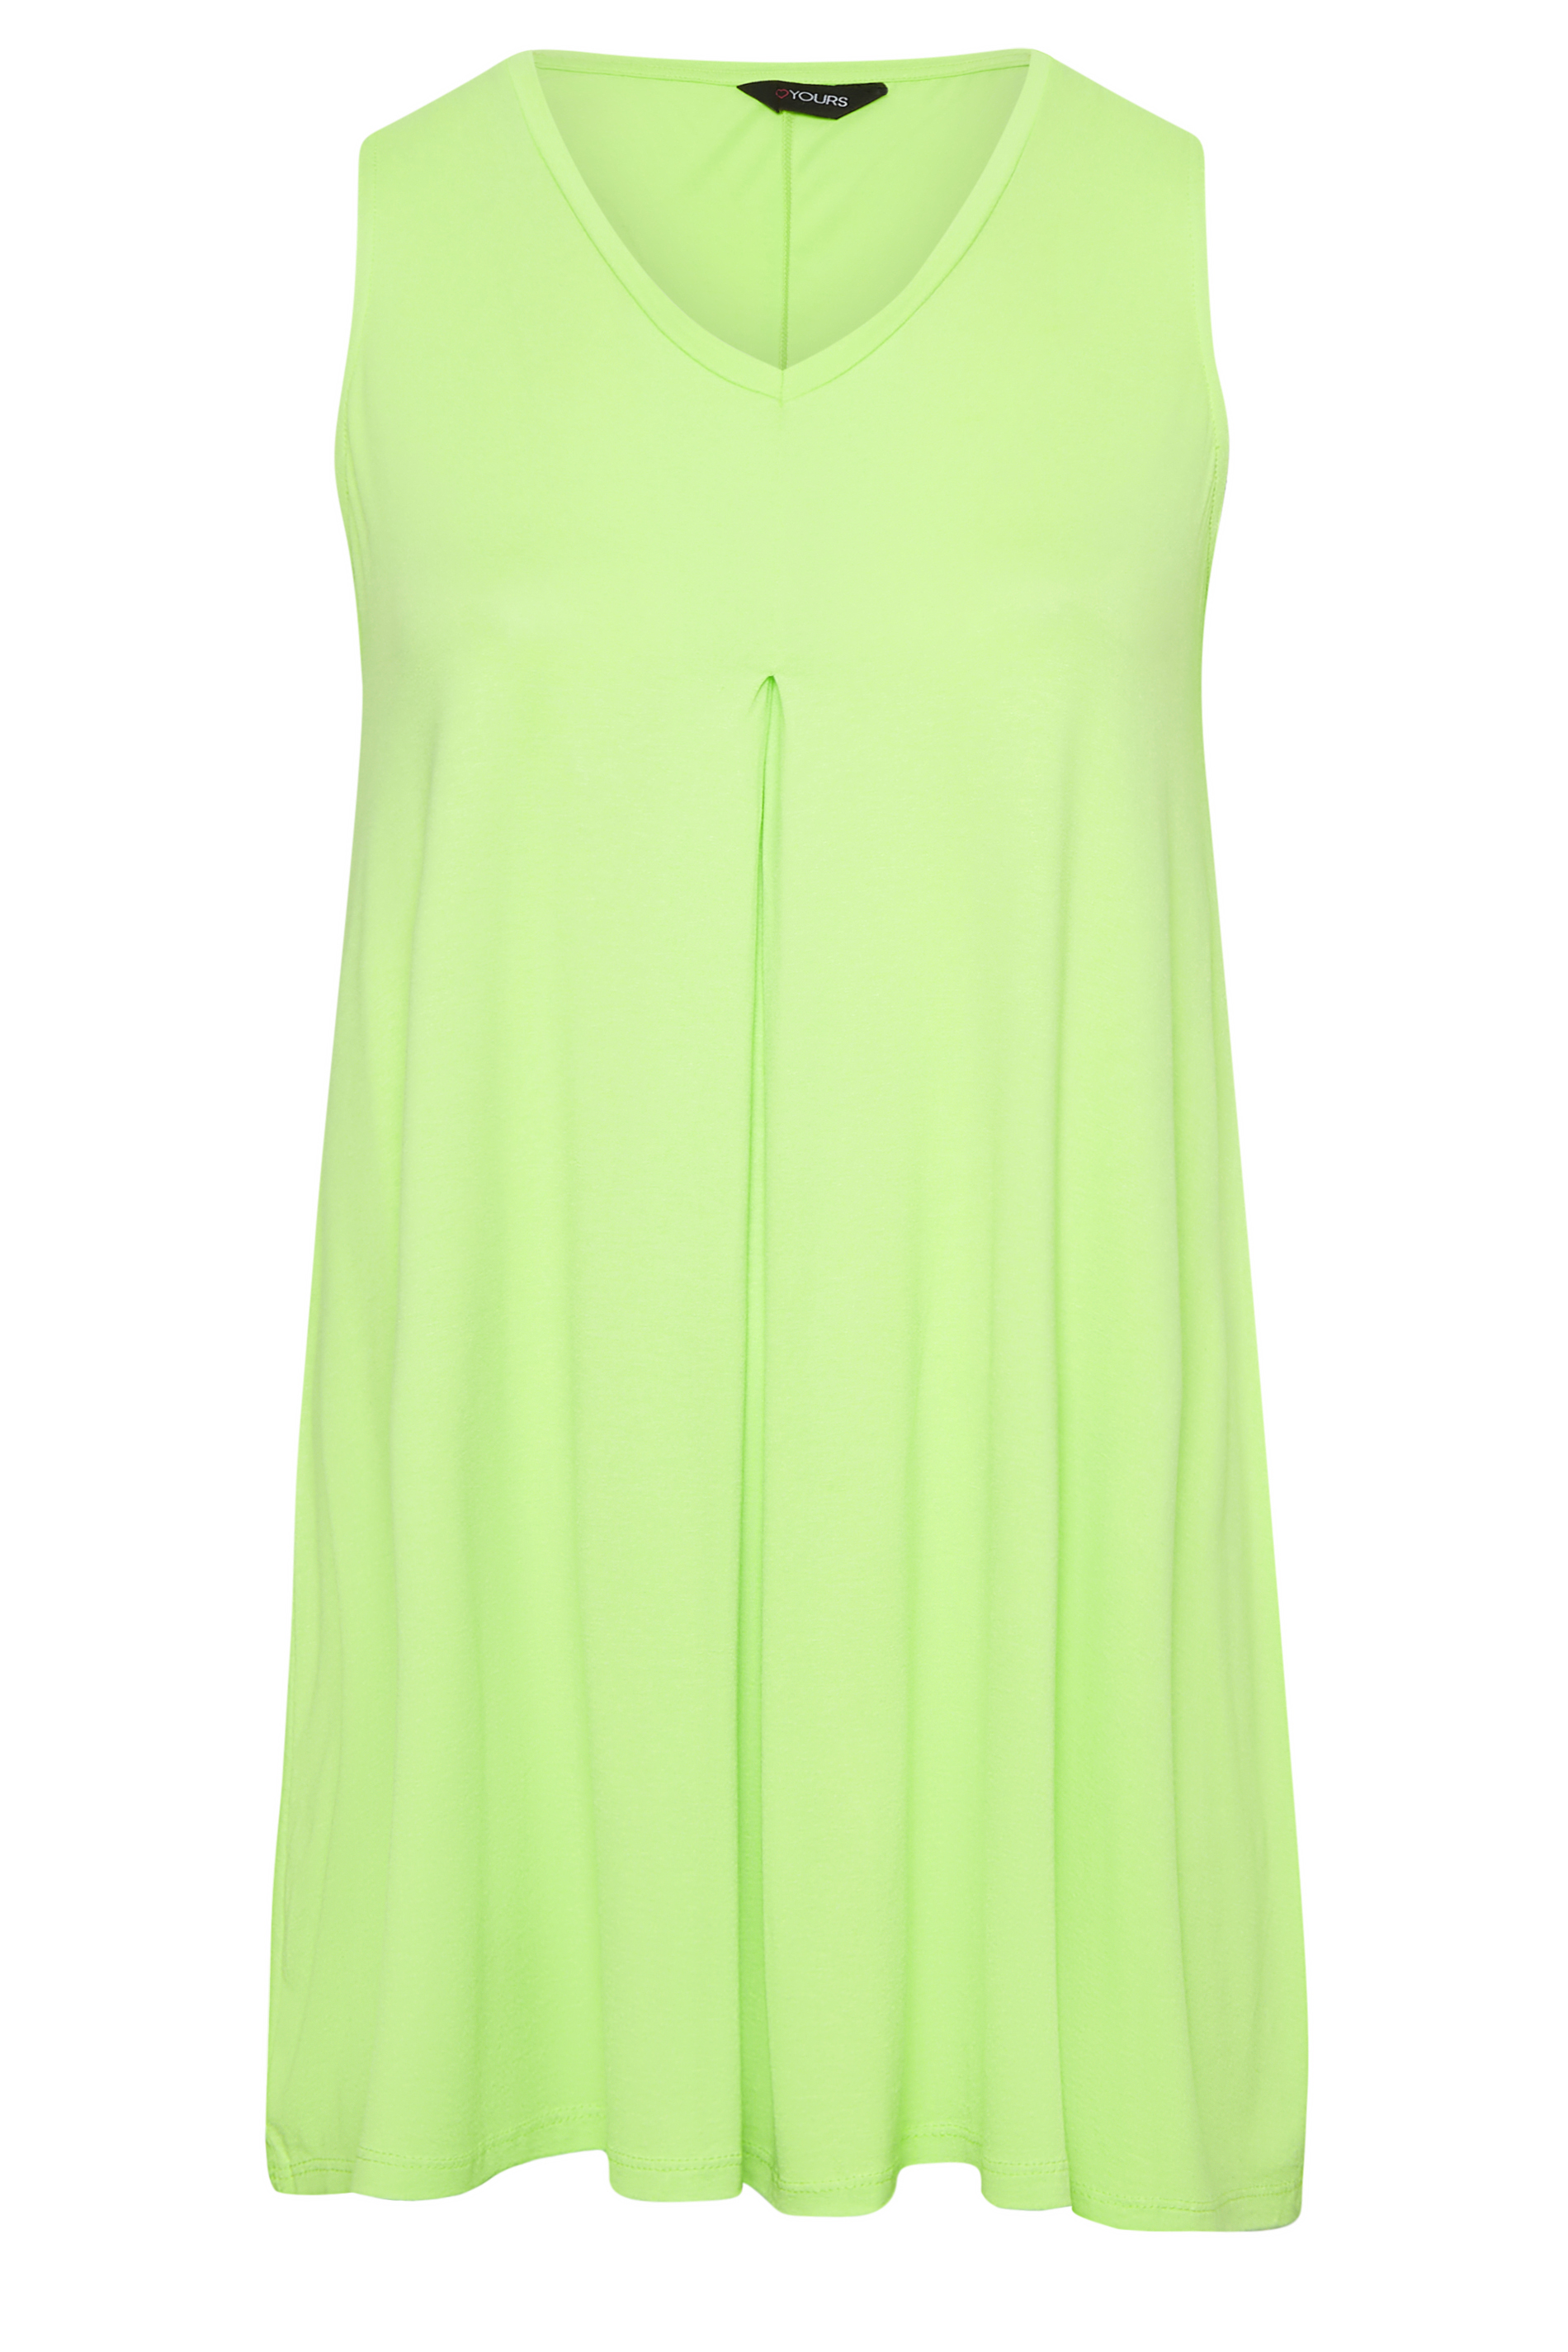 YOURS Plus Size Lime Green Swing Vest Top | Yours Clothing